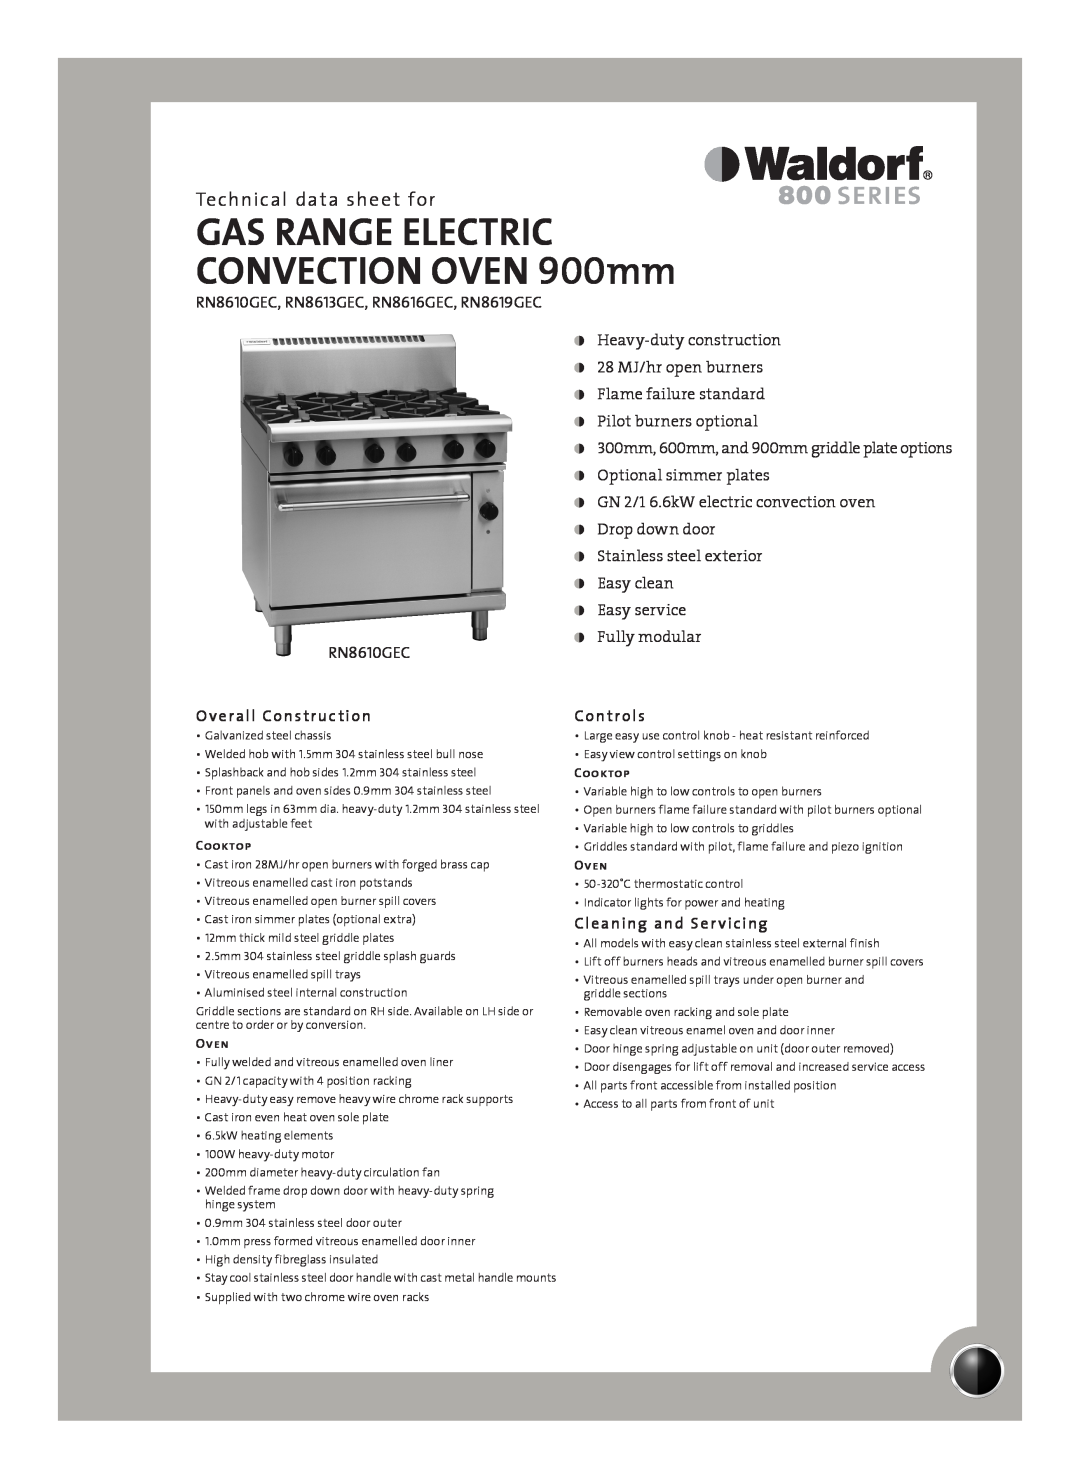 Moffat RN8613GEC manual Technical data sheet for, Overall Construction, Controls, Cleaning and Ser vicing, Cooktop, Oven 